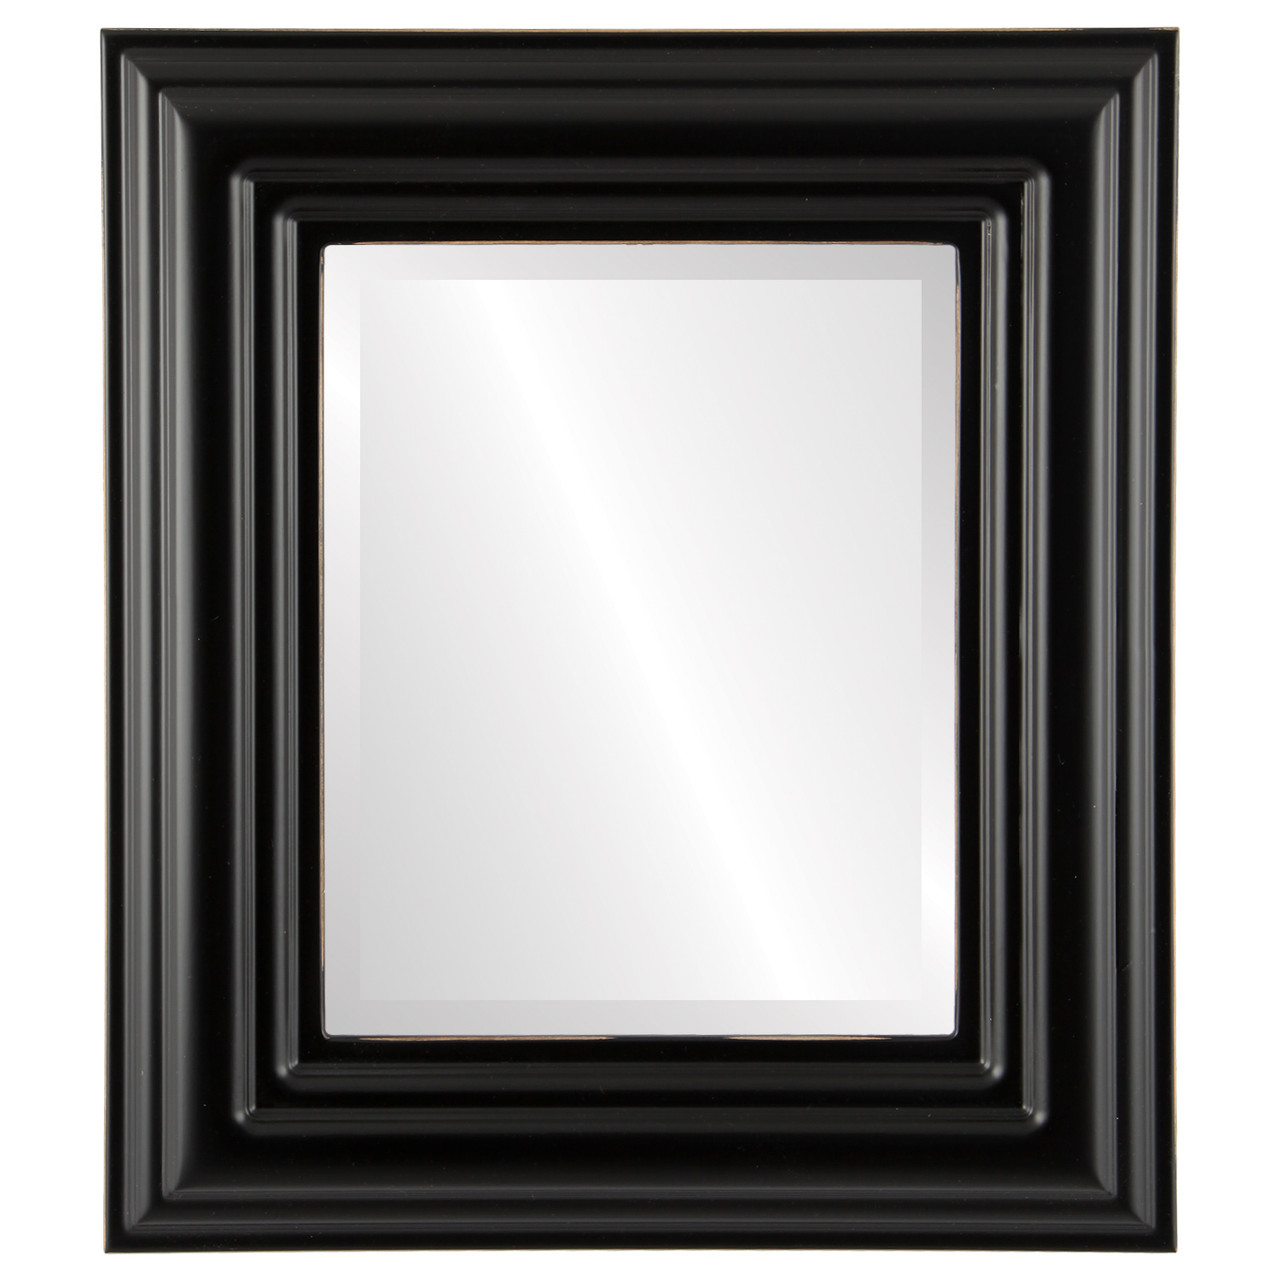 Contemporary Black Rectangle Mirrors from $0 | Free Shipping